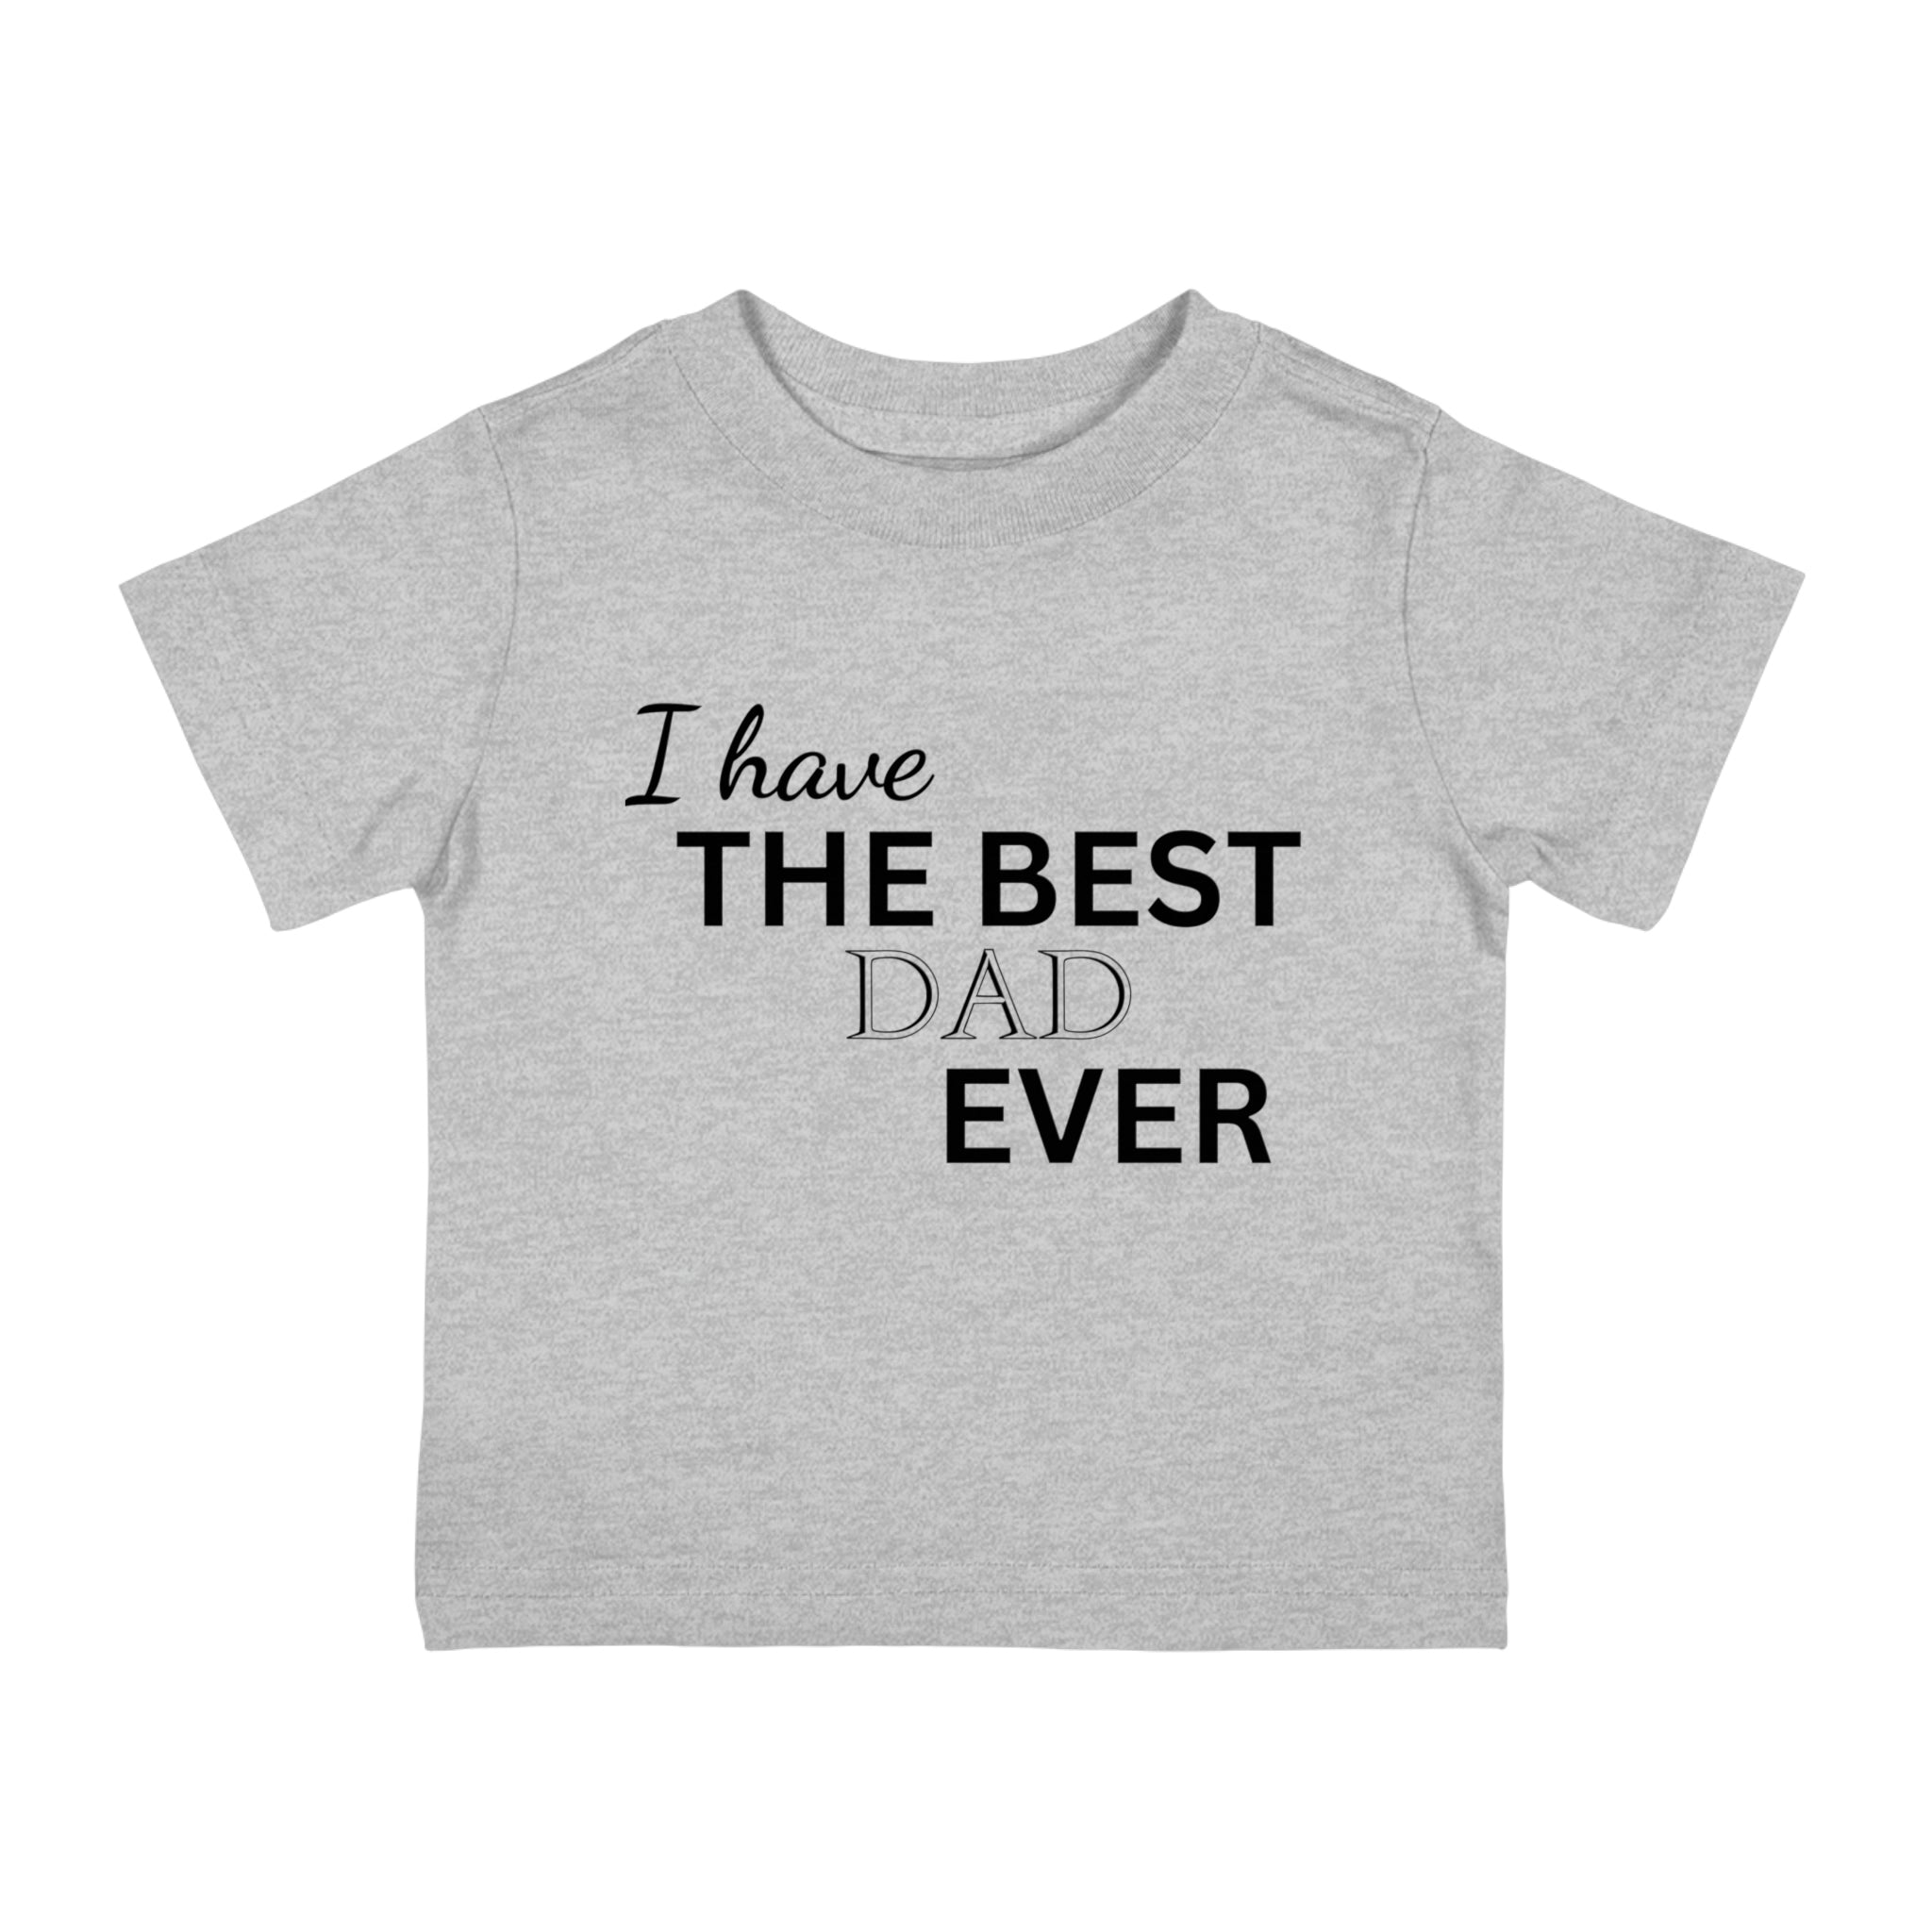 I Have The Best Dad Ever Infant Shirt, Baby Tee, Infant Tee